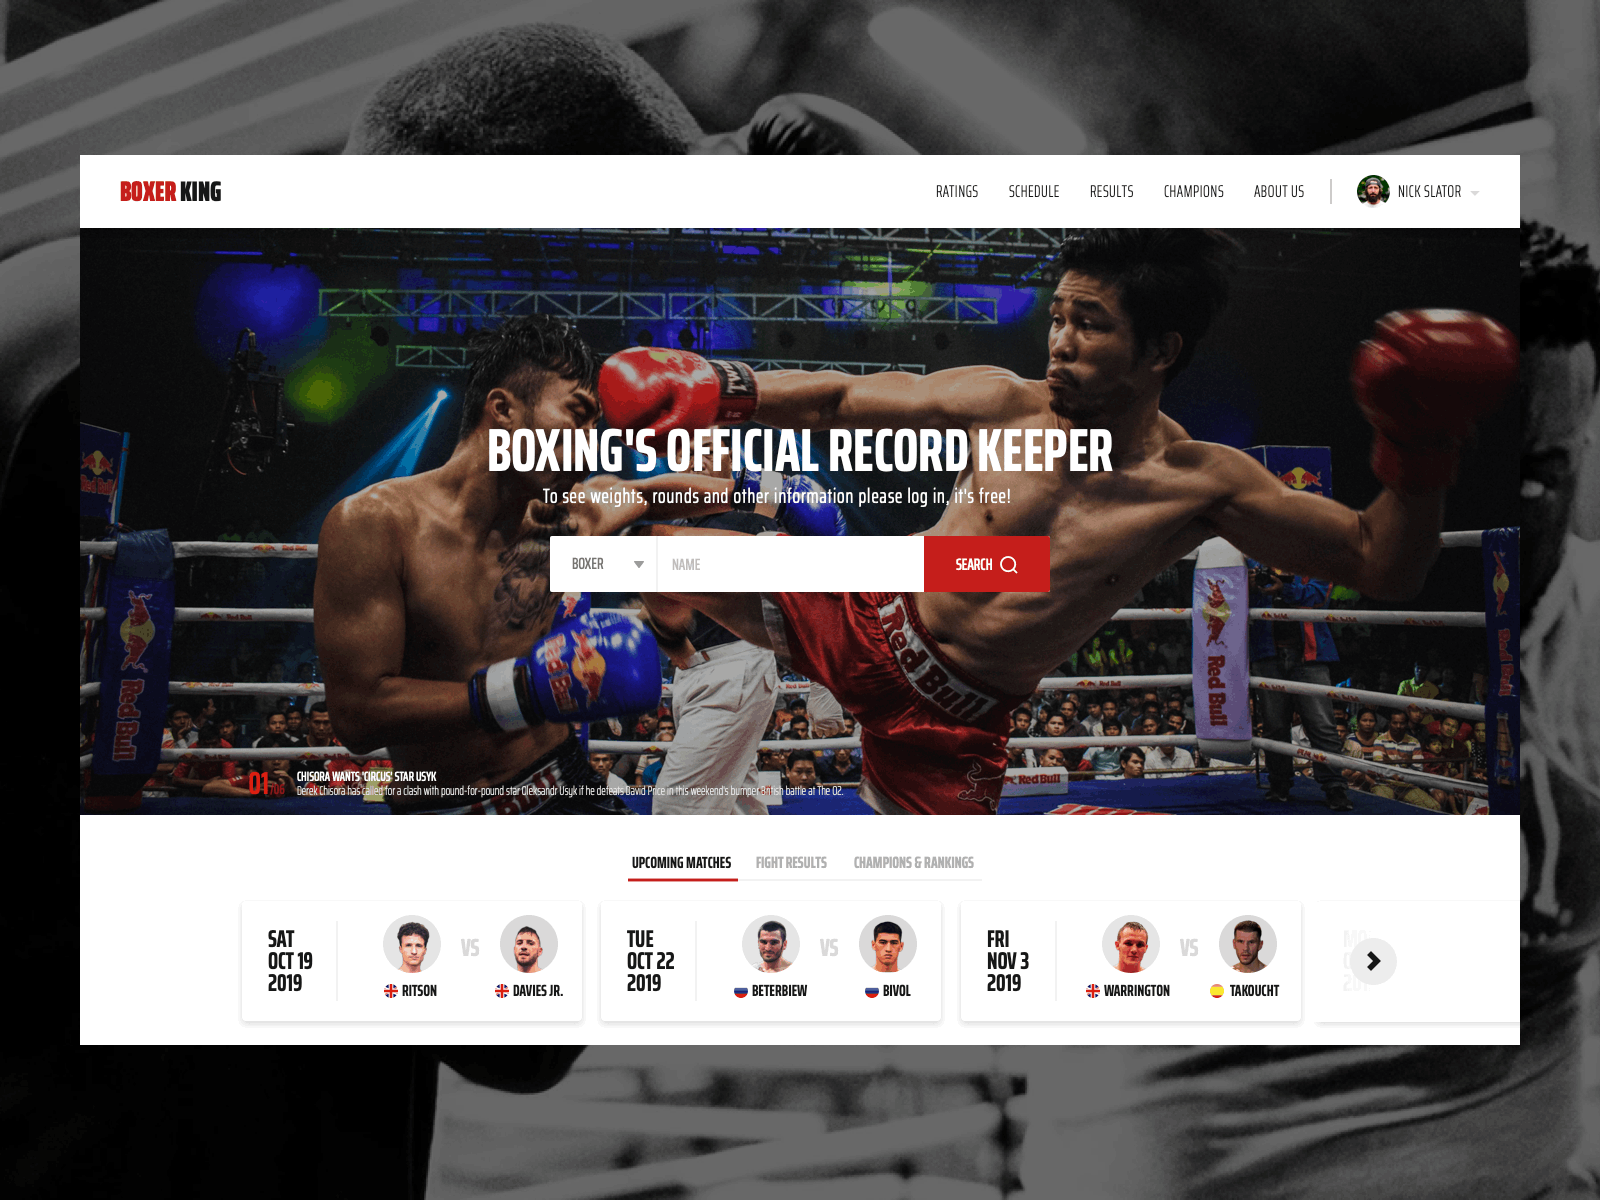 Boxing Website-Landing Page animated banner boing news boxerking boxing boxing results boxing website brand fight image banners interaction interaction design interactive web martial arts website matches mobile respoinsive results rwd sanal web banner website design